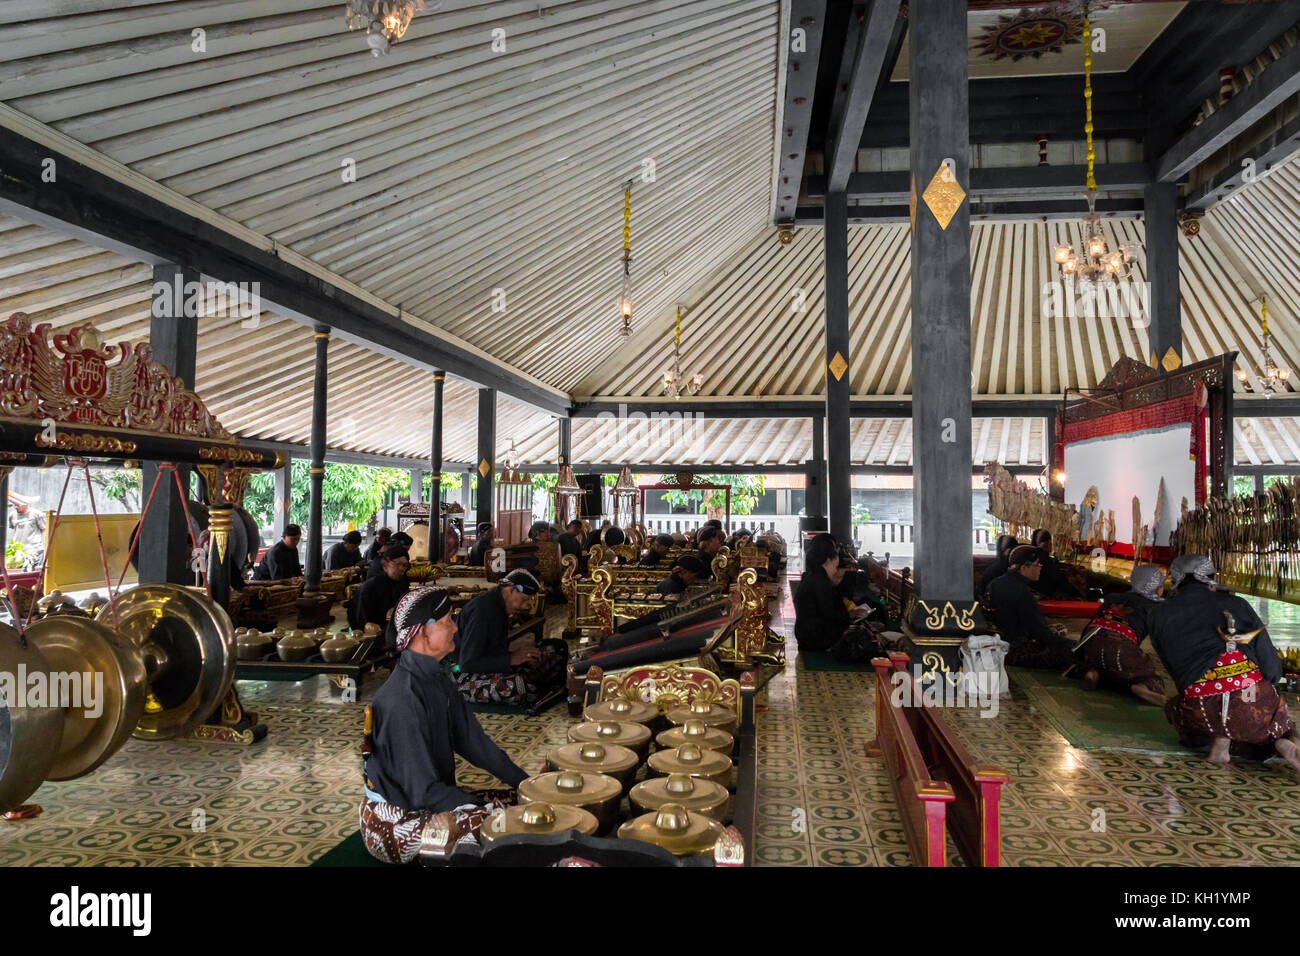 Yogyakarta, Indonesia - October 20171: Gamelan orchestra at Kraton grand palace ,Yogyakarta, Indonesia. Gamelan is a traditional music fin Indonesia Stock Photo